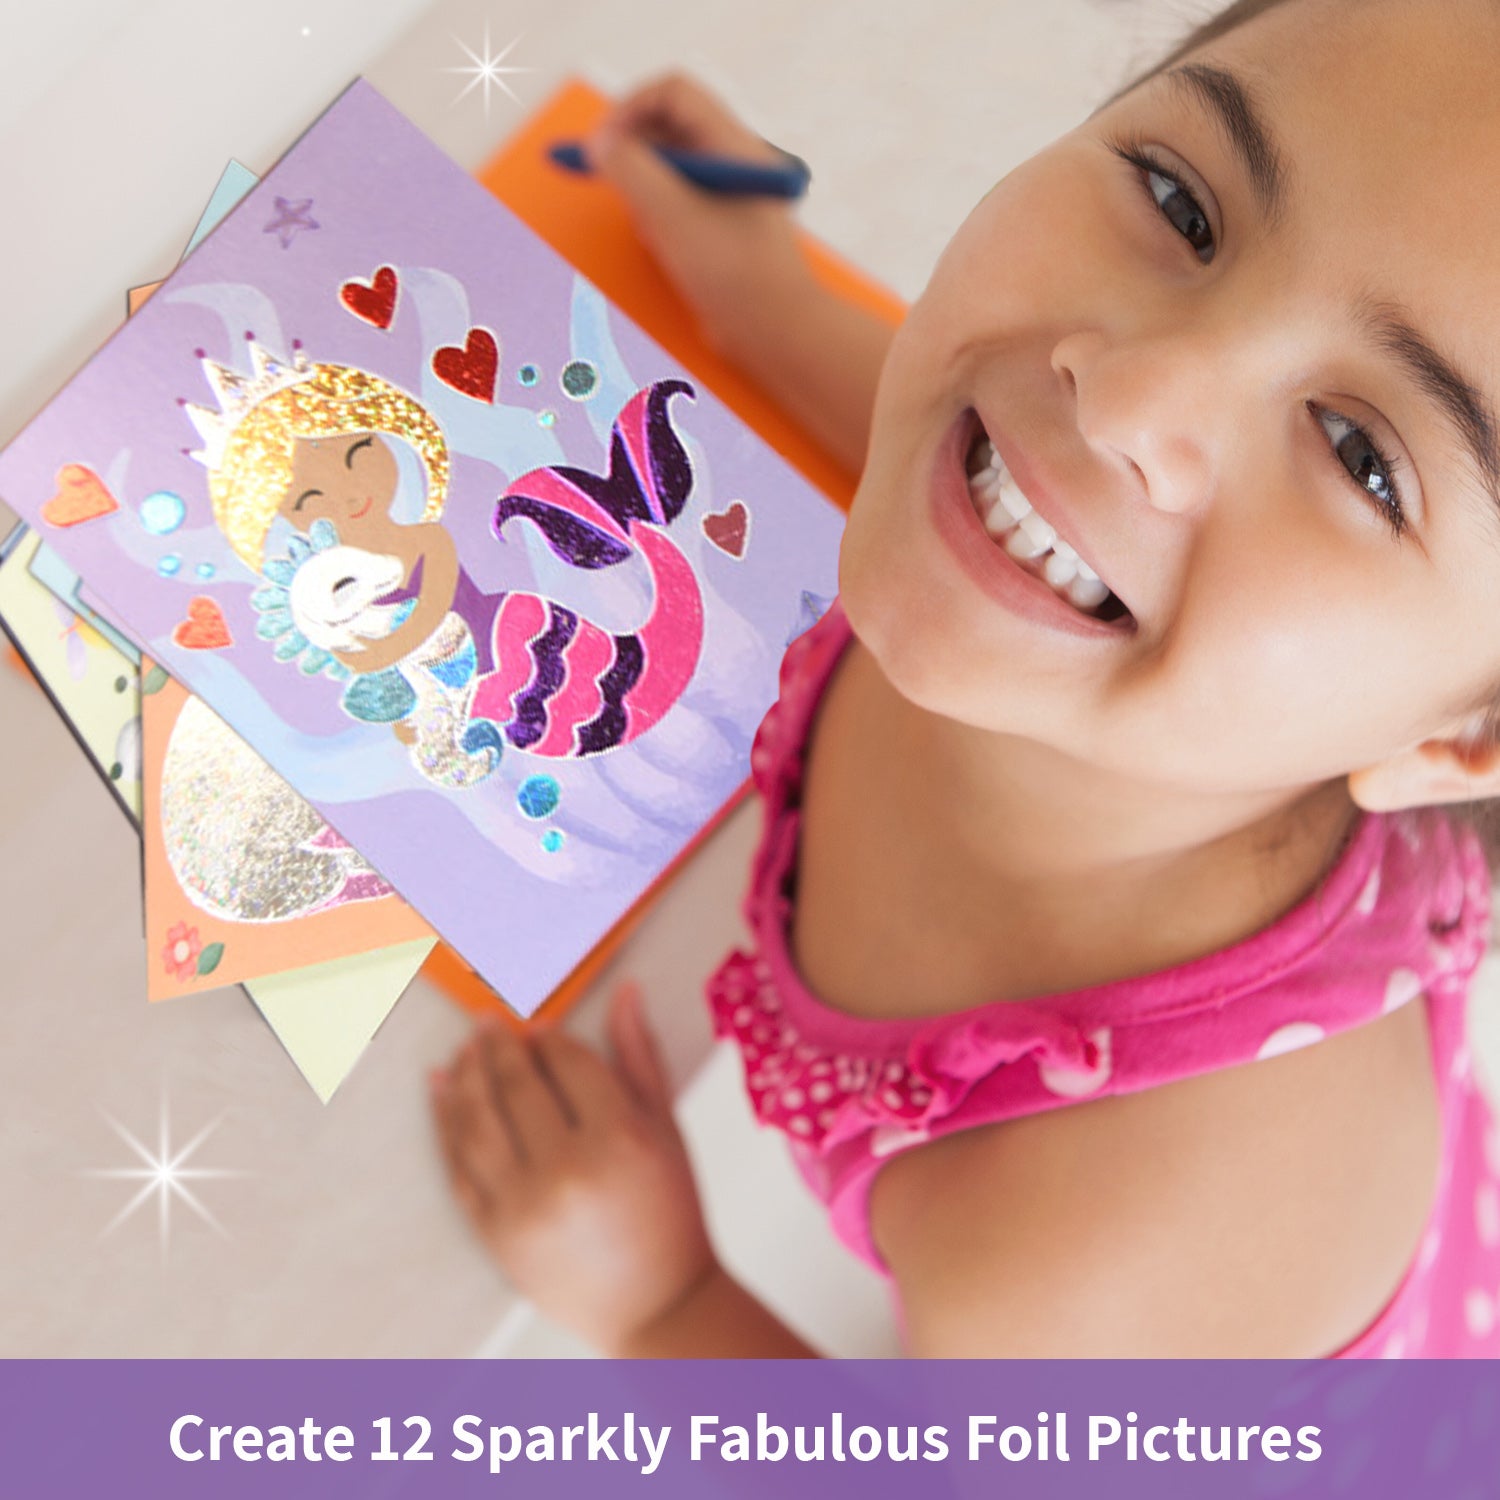 Chalk and Chuckles Fabulous Foil Art-Magical World. How to create?